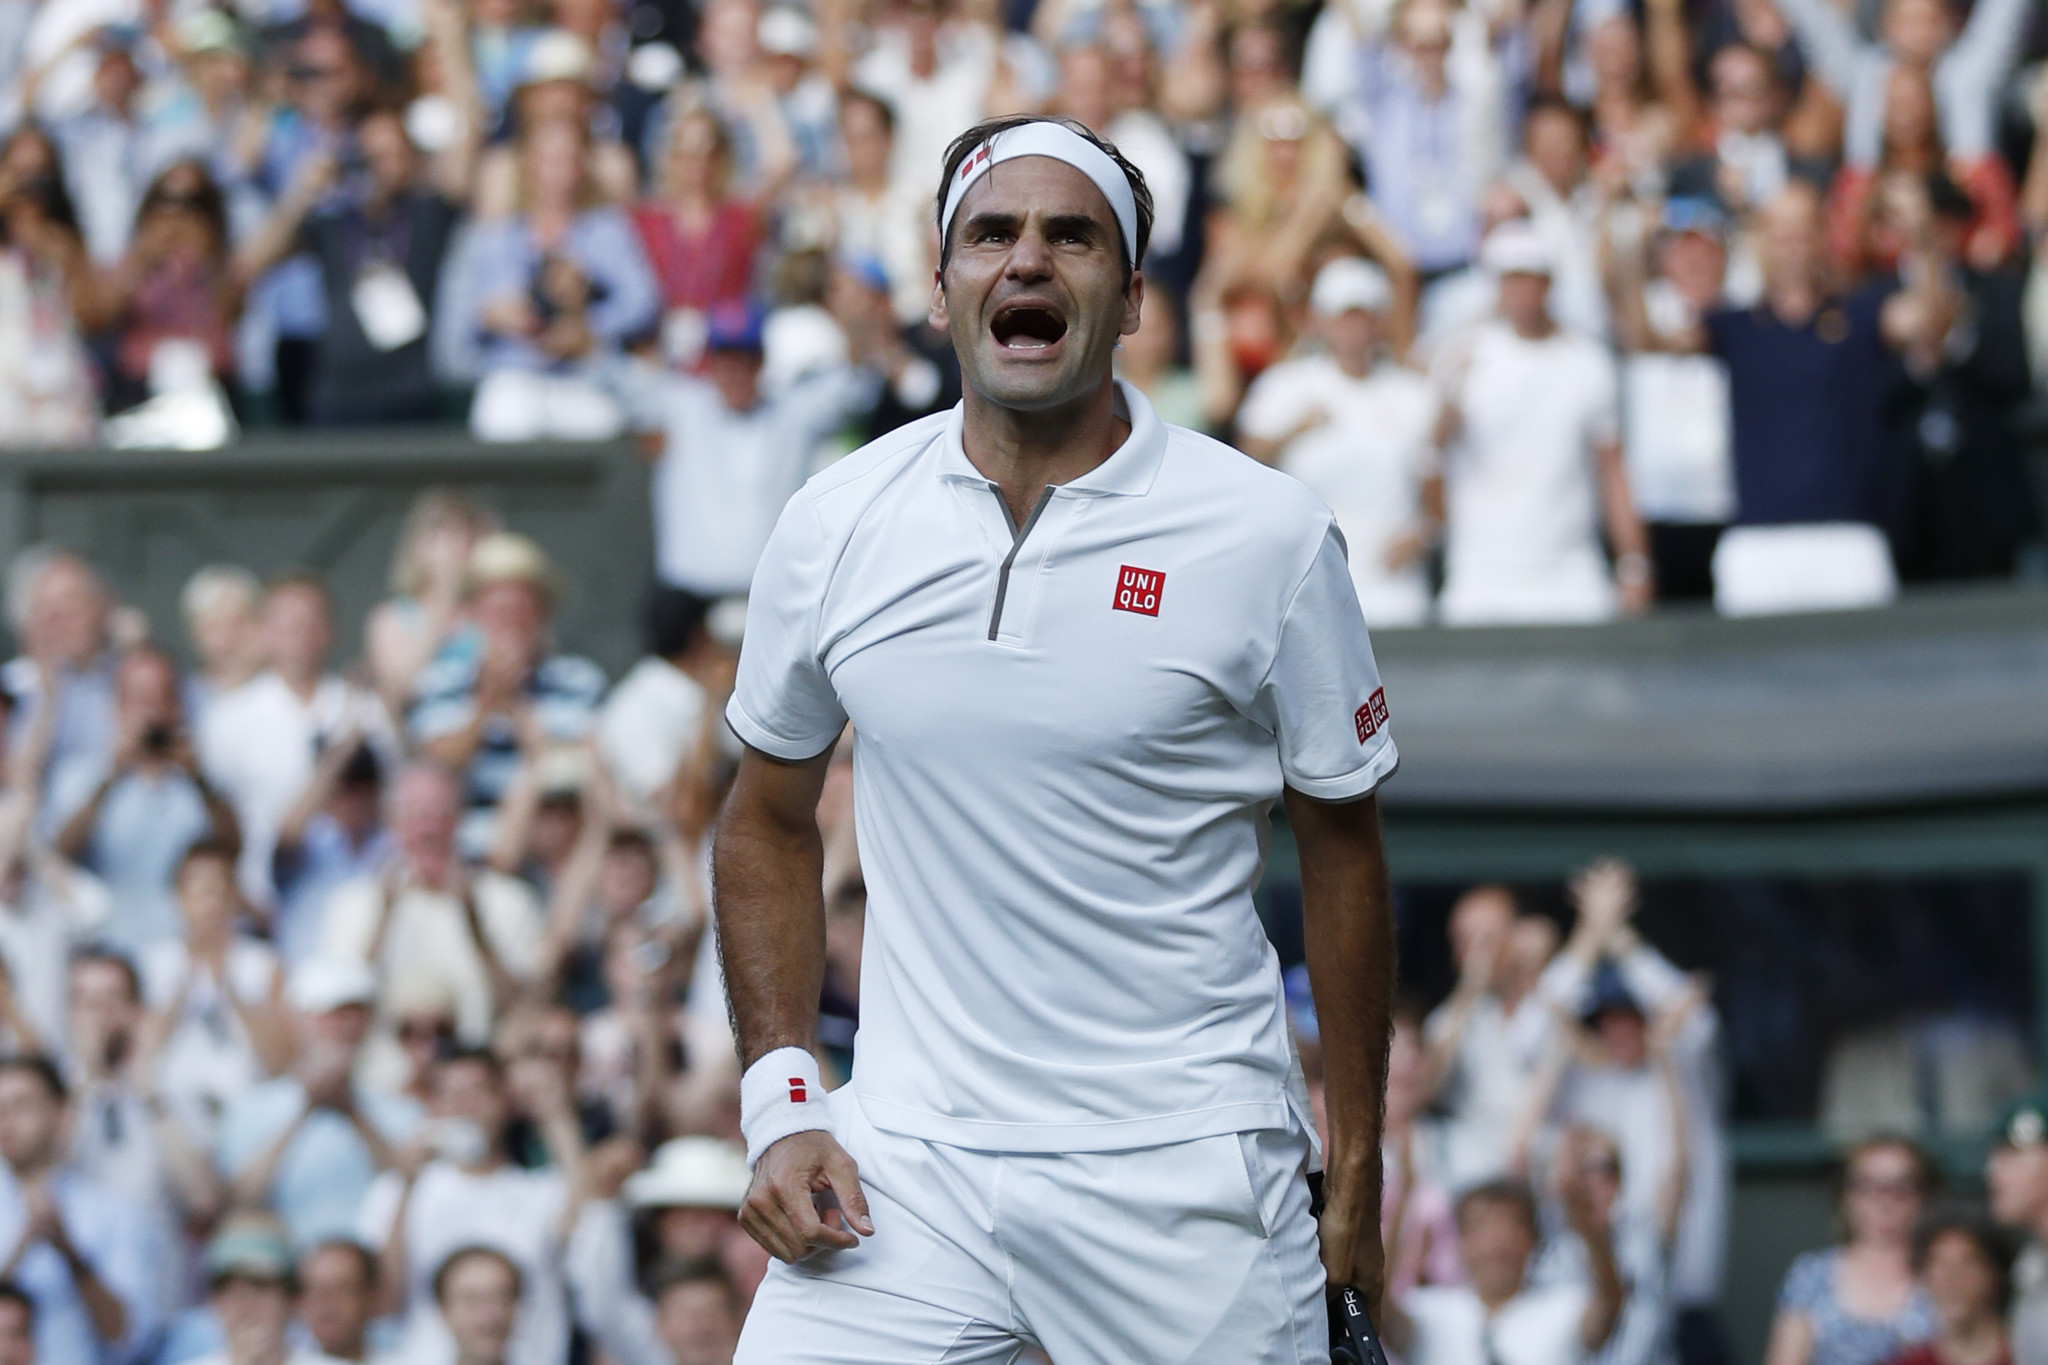 Federer and Nadal play out vintage semi-final at Wimbledon